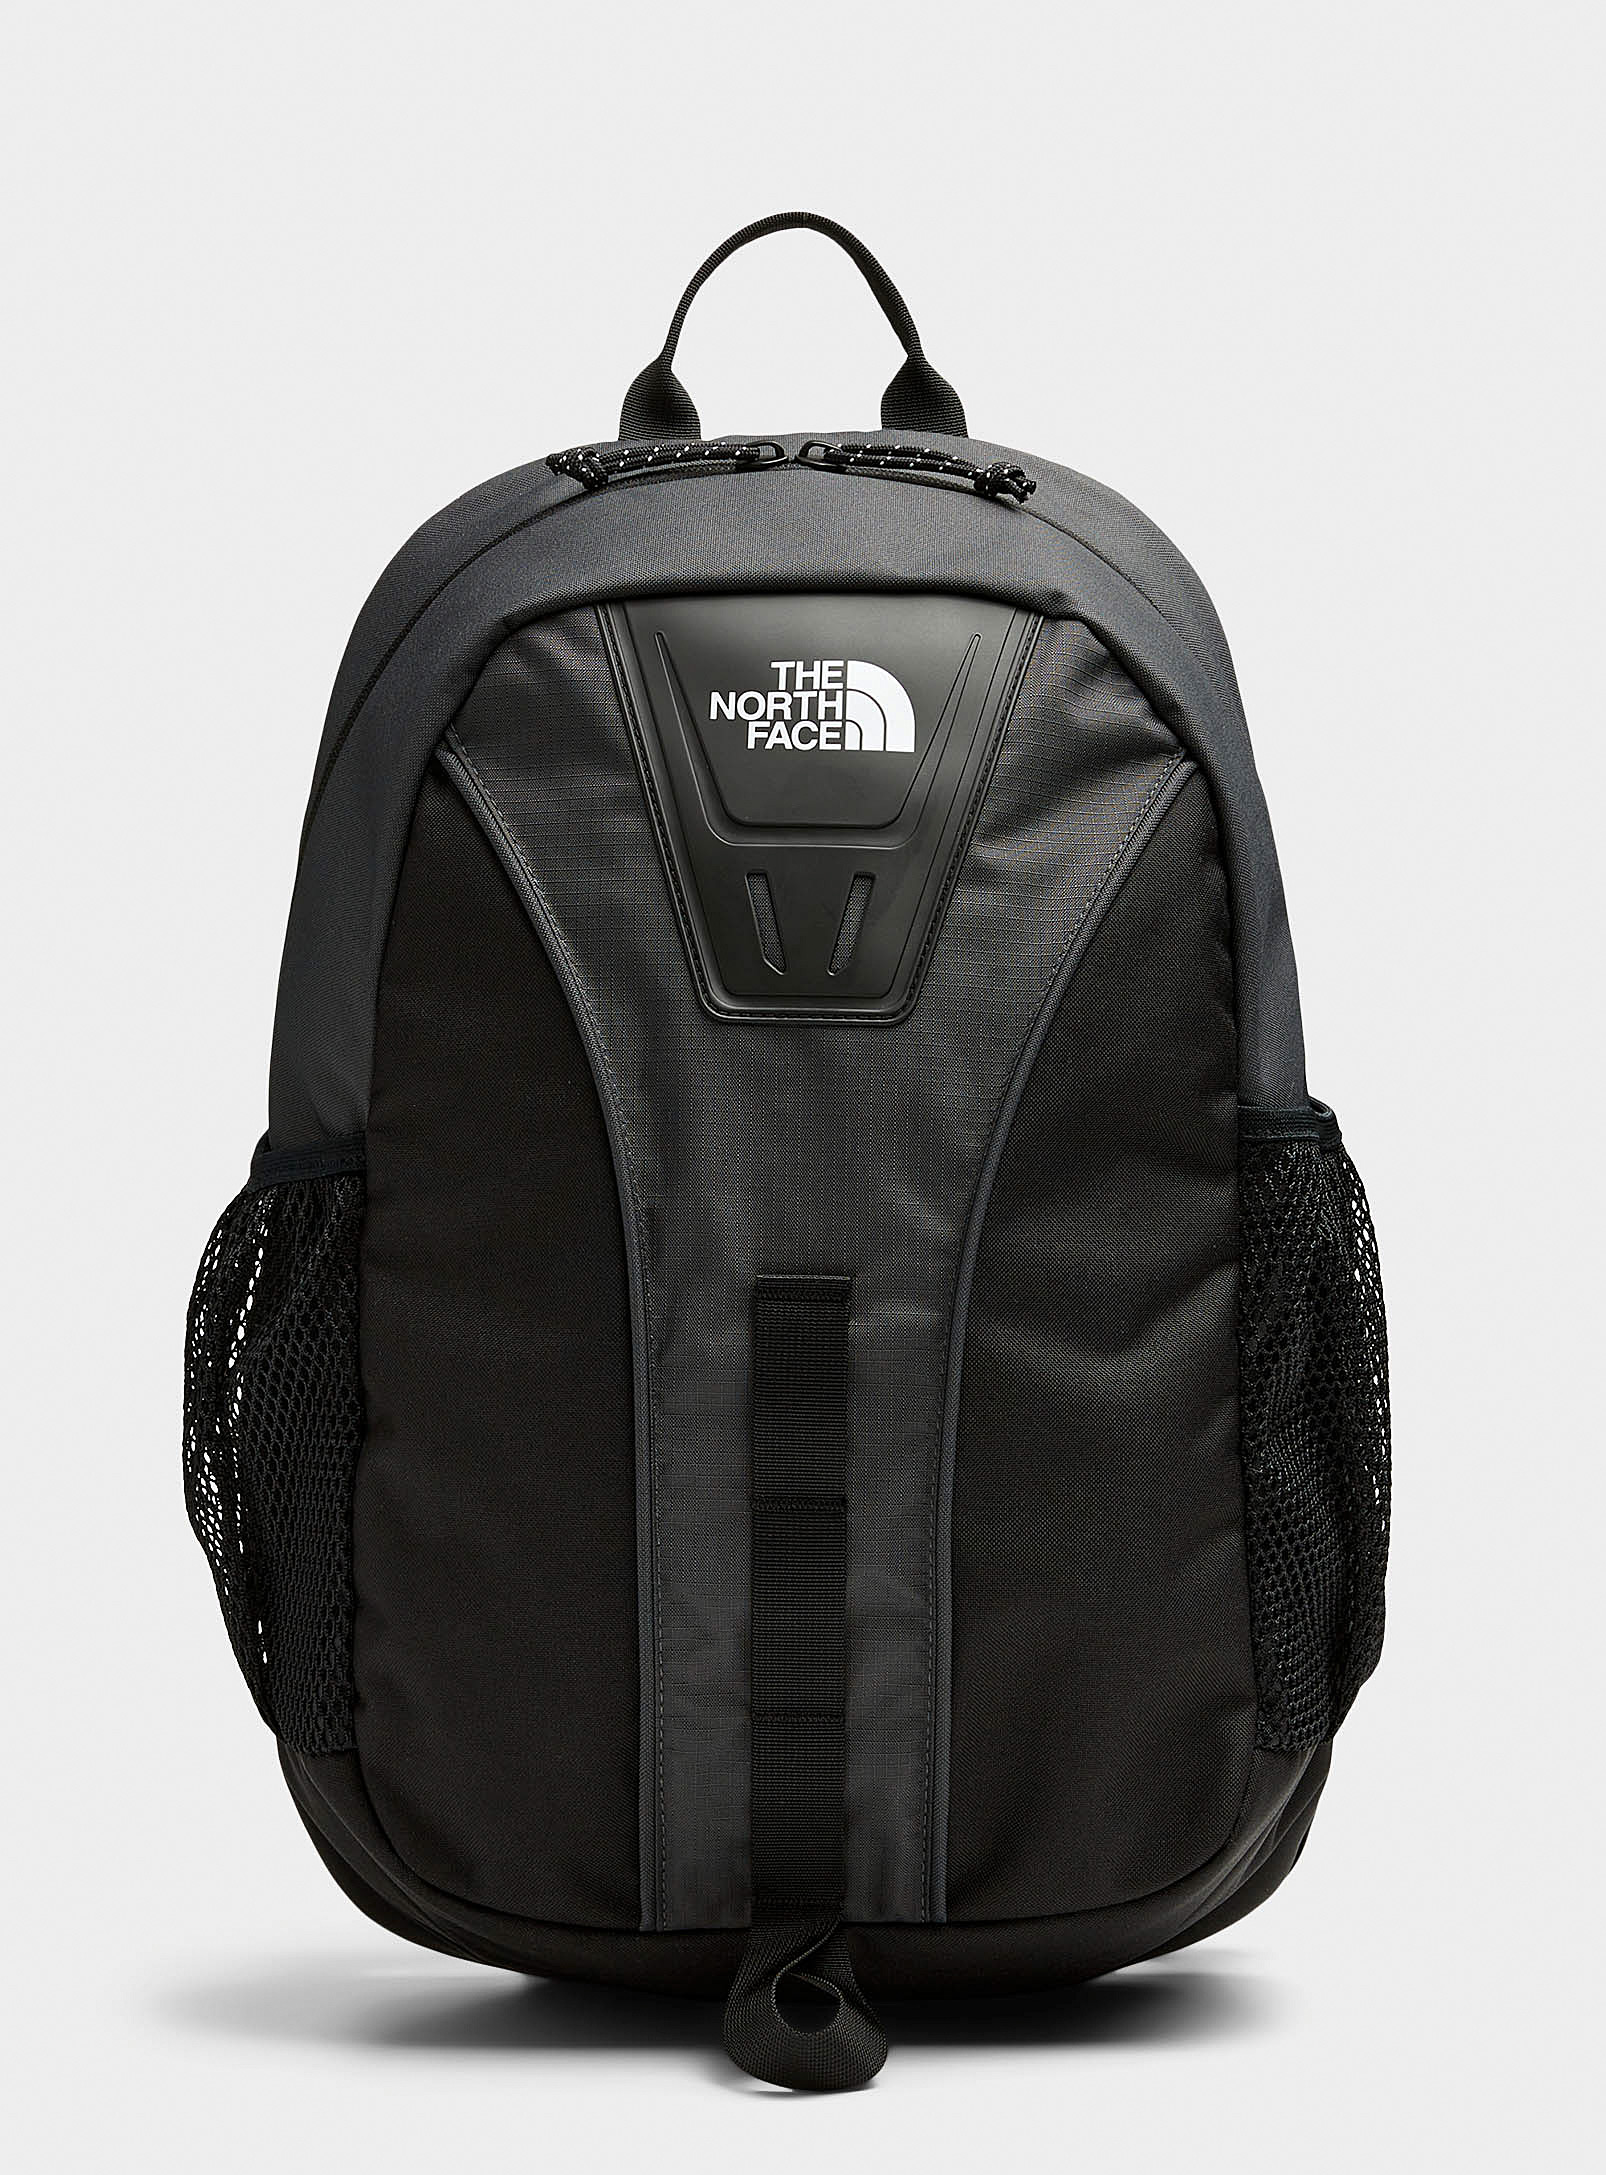 The North Face - Men's Daypack Tech backpack